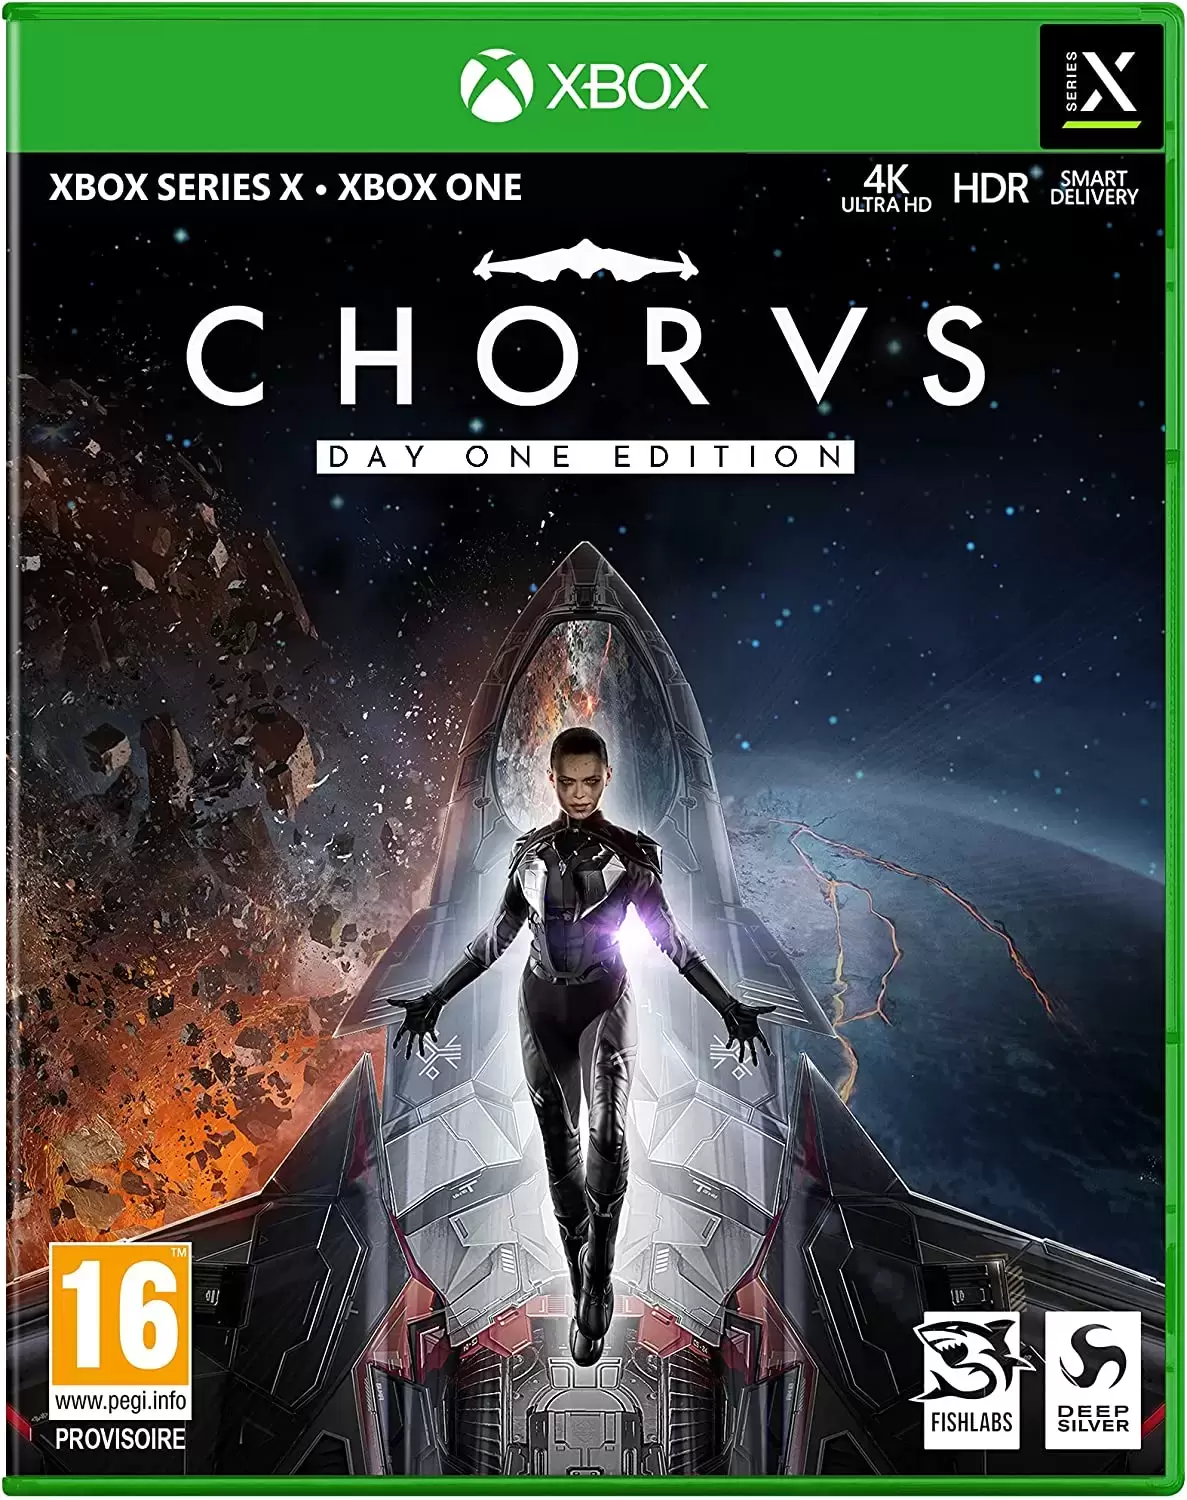 XBOX One Games - Chorus - Day One Edition